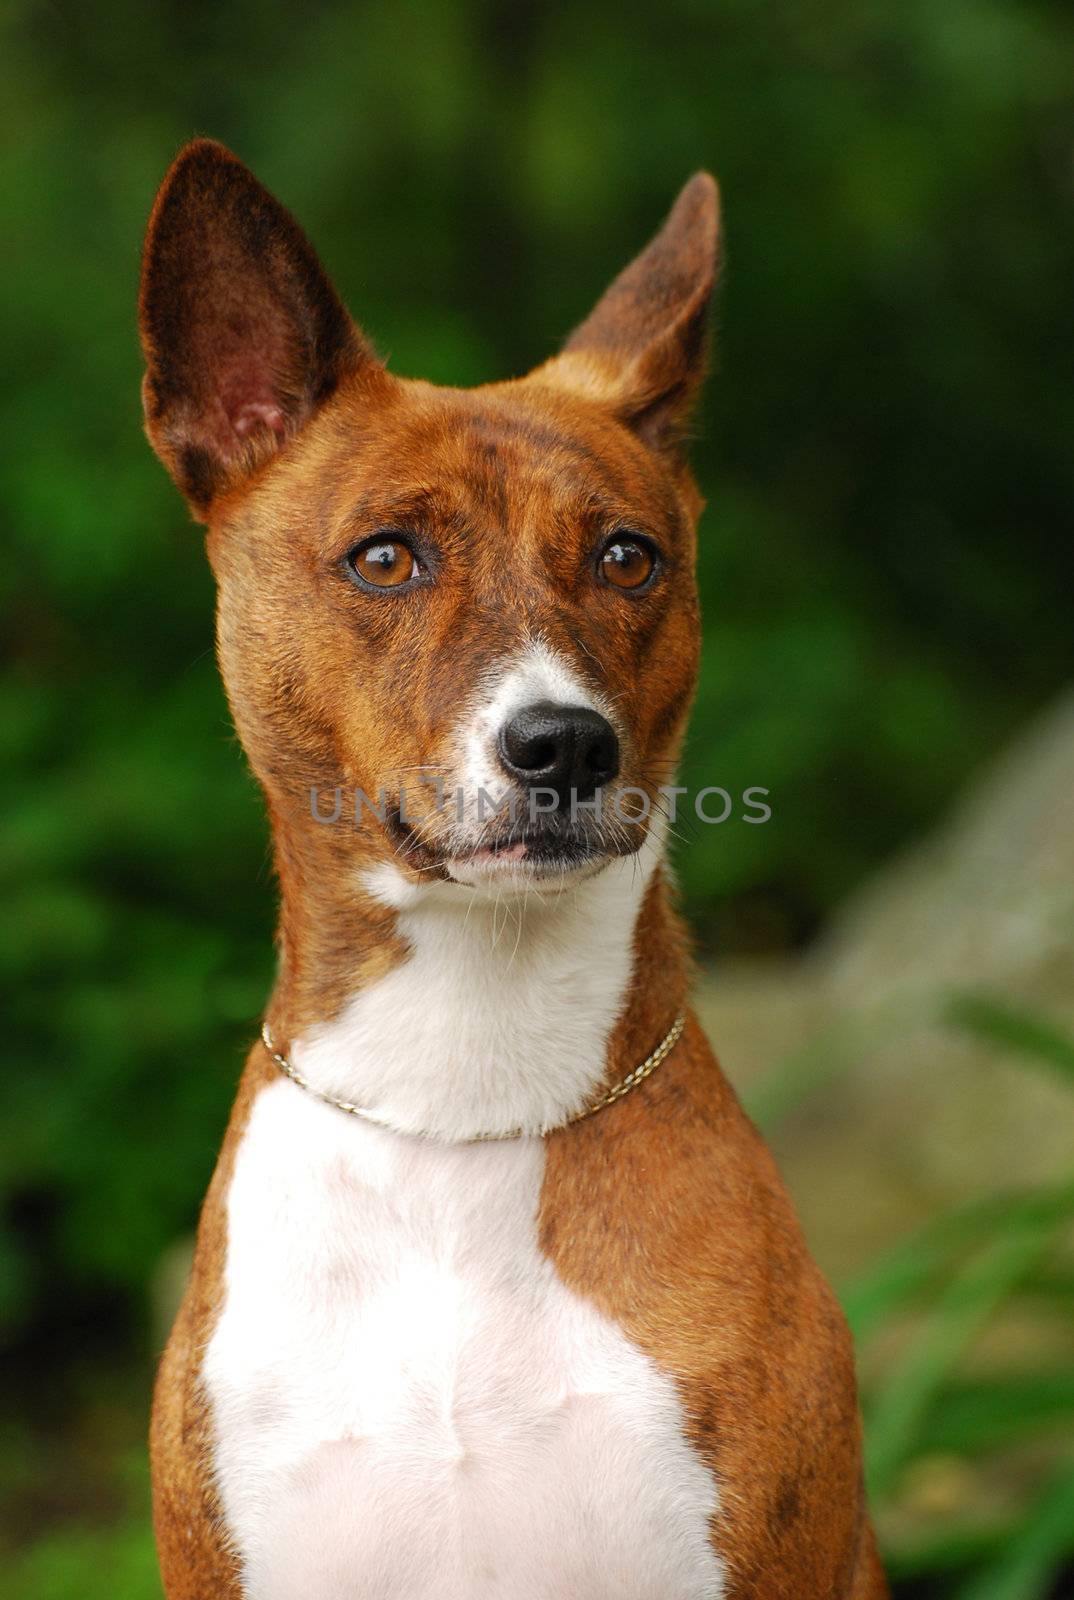 The Basenji is a breed of hunting dog portrait